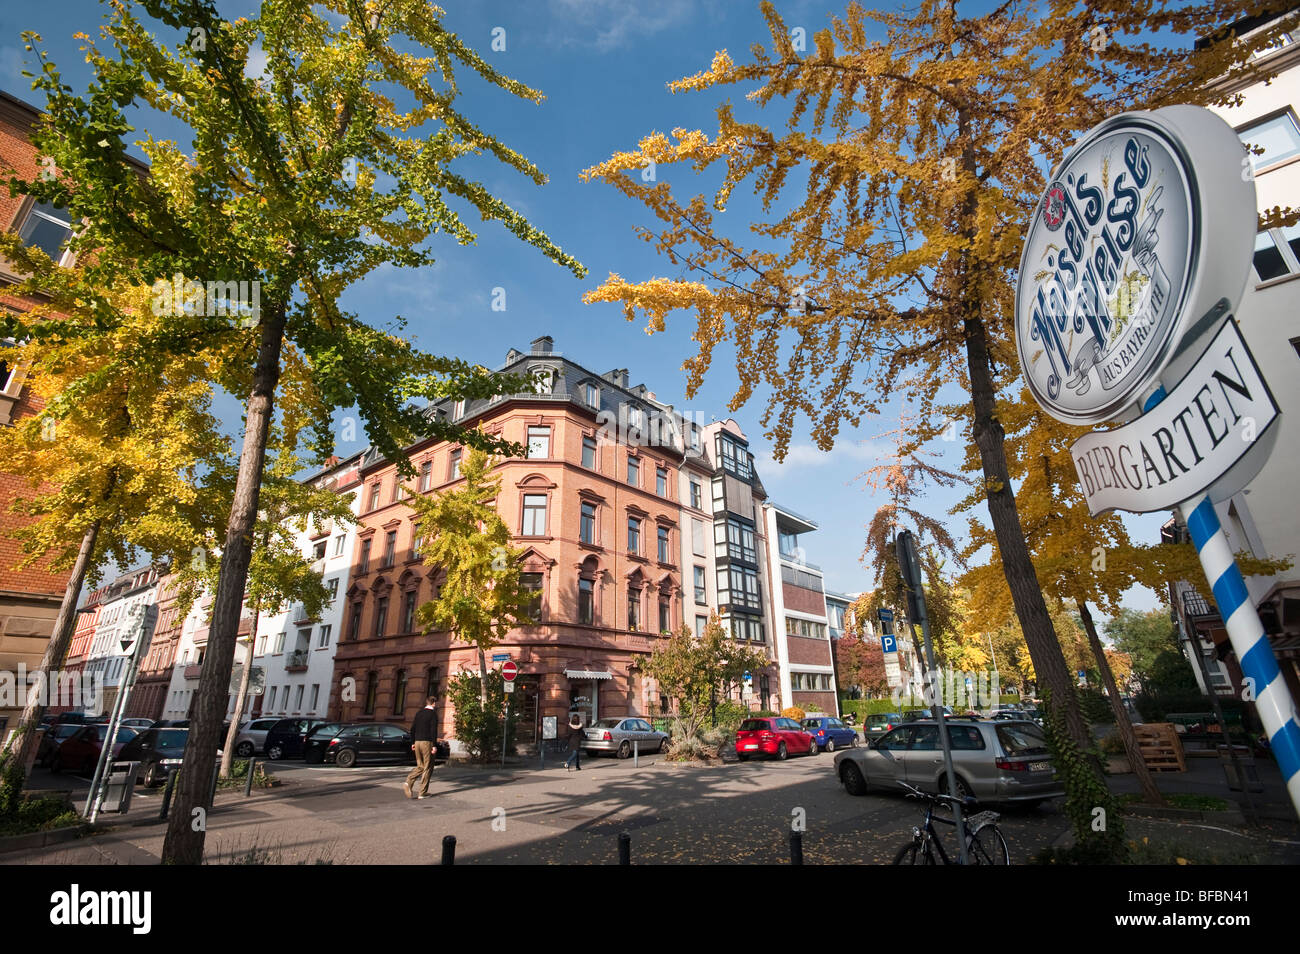 autumn in a city in germany Stock Photo